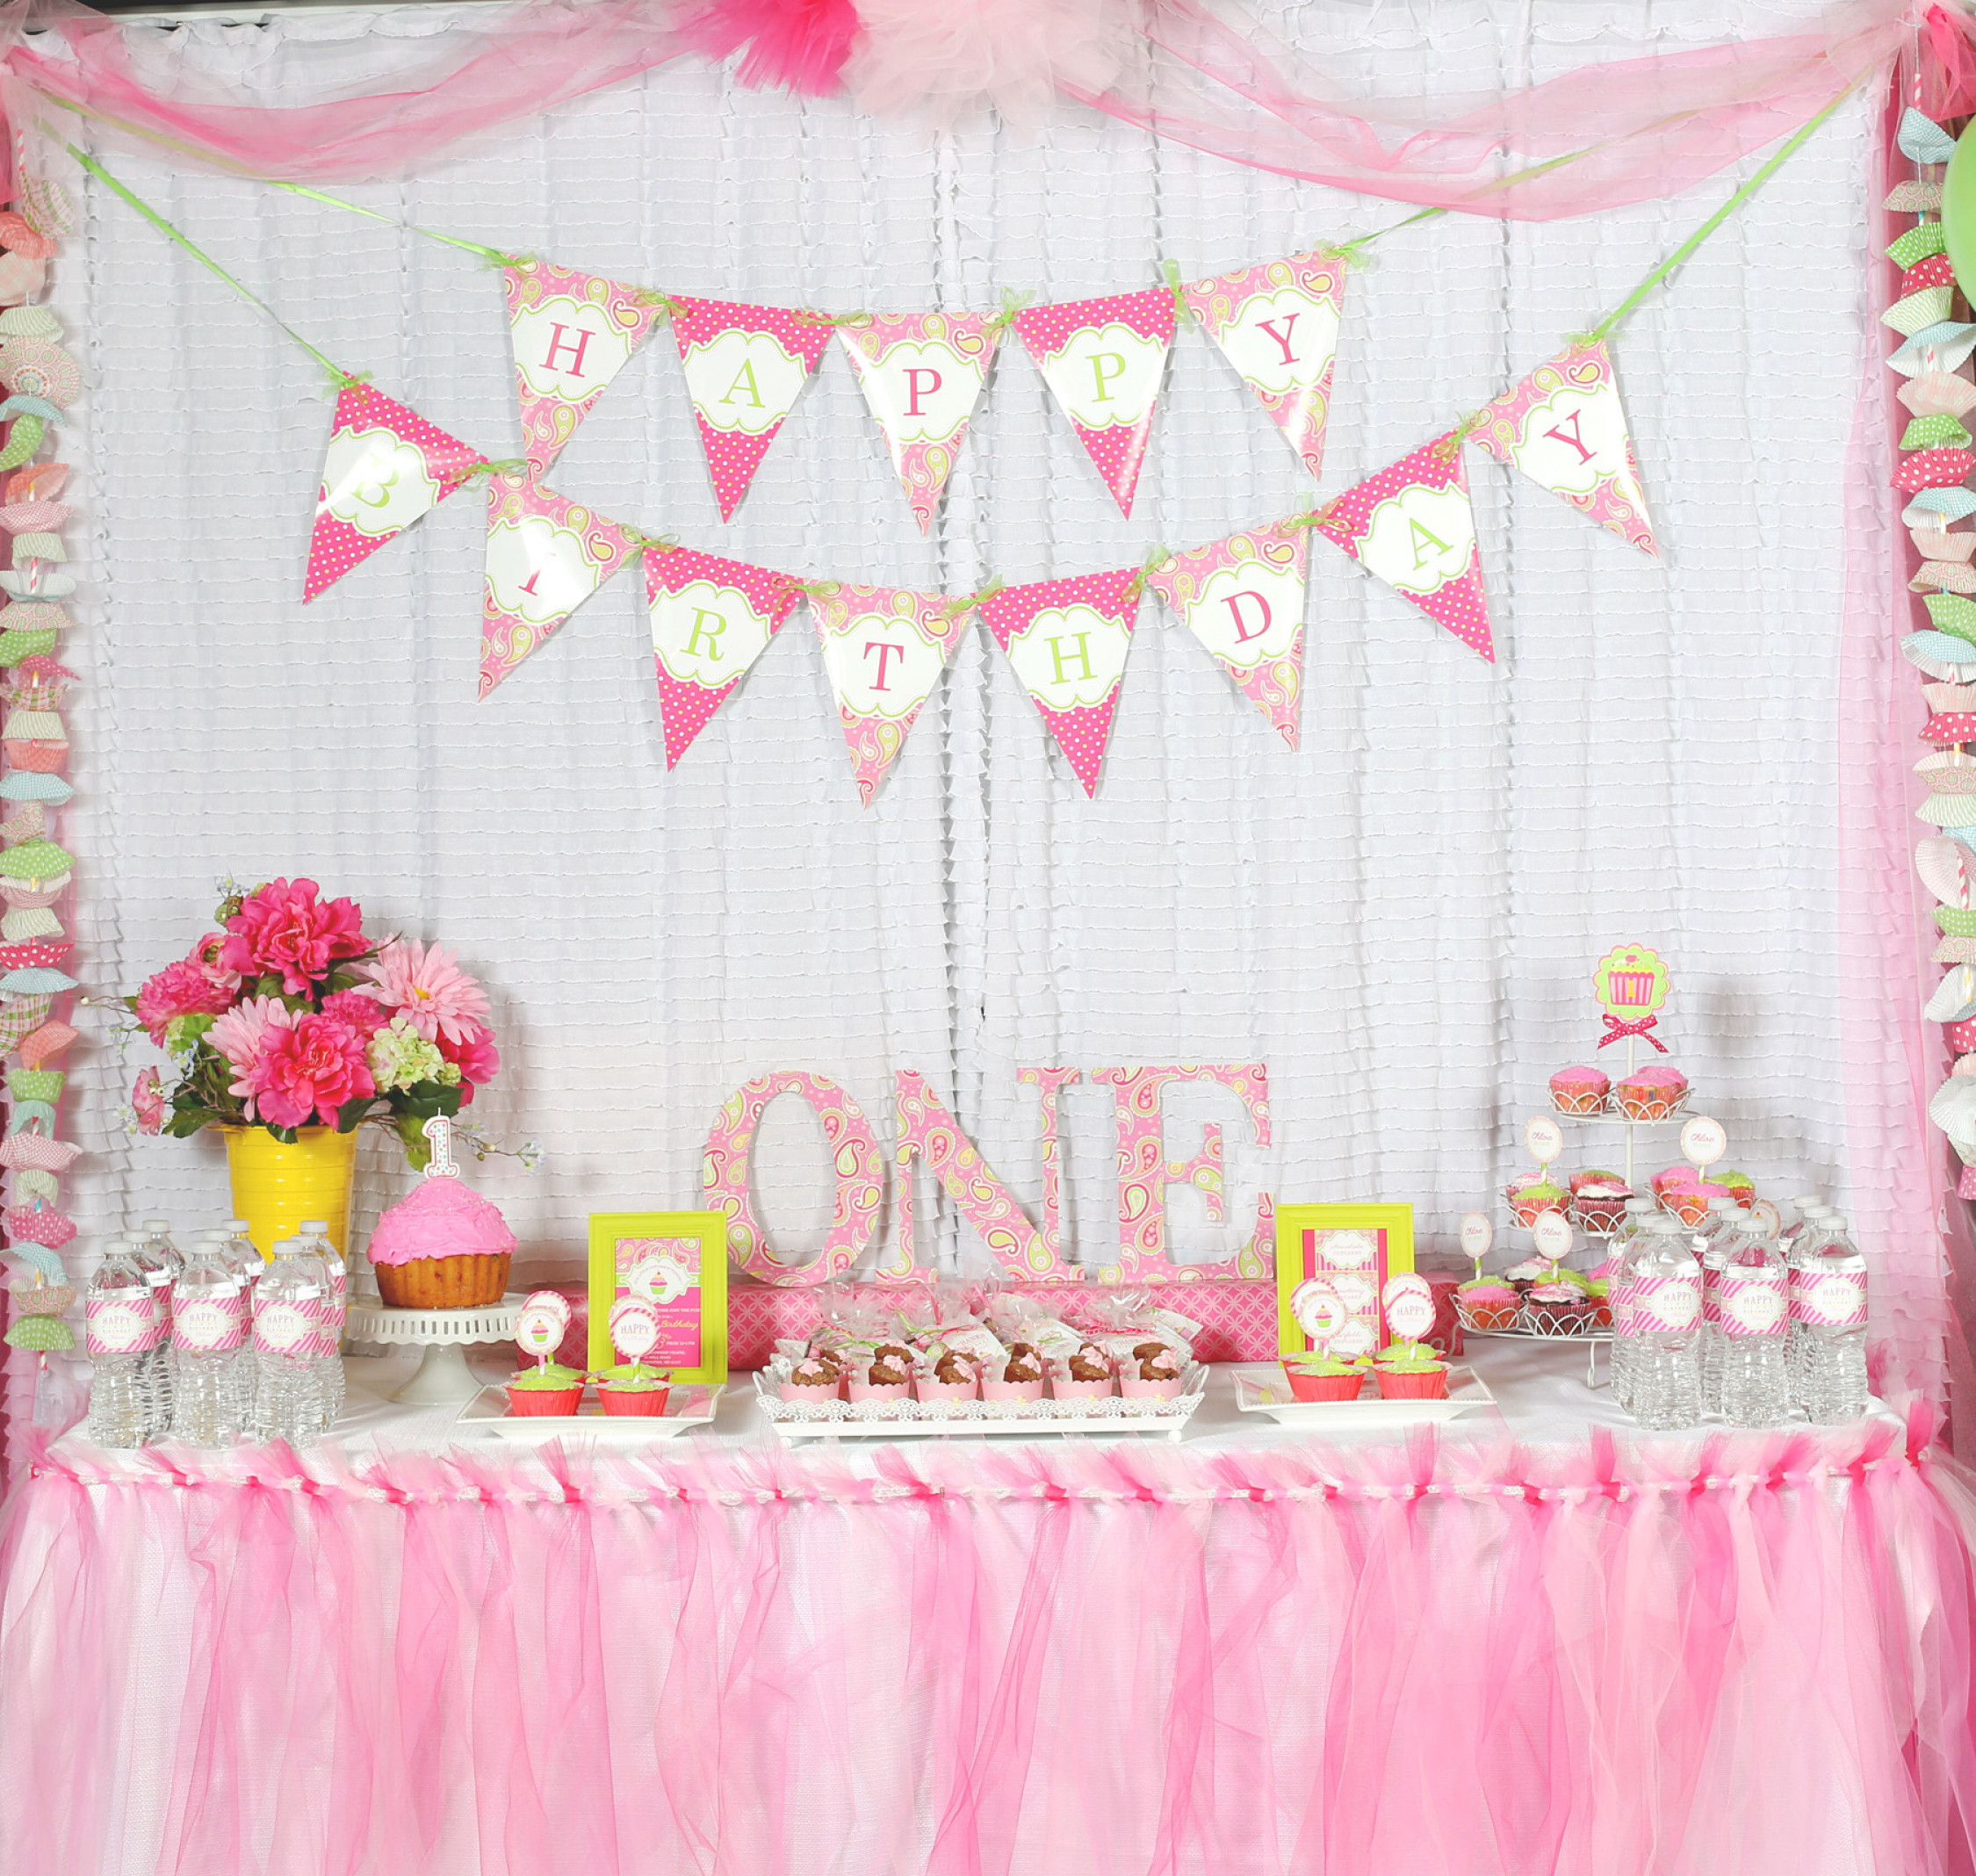 First Birthday Decoration Ideas
 A Cupcake Themed 1st Birthday party with Paisley and Polka